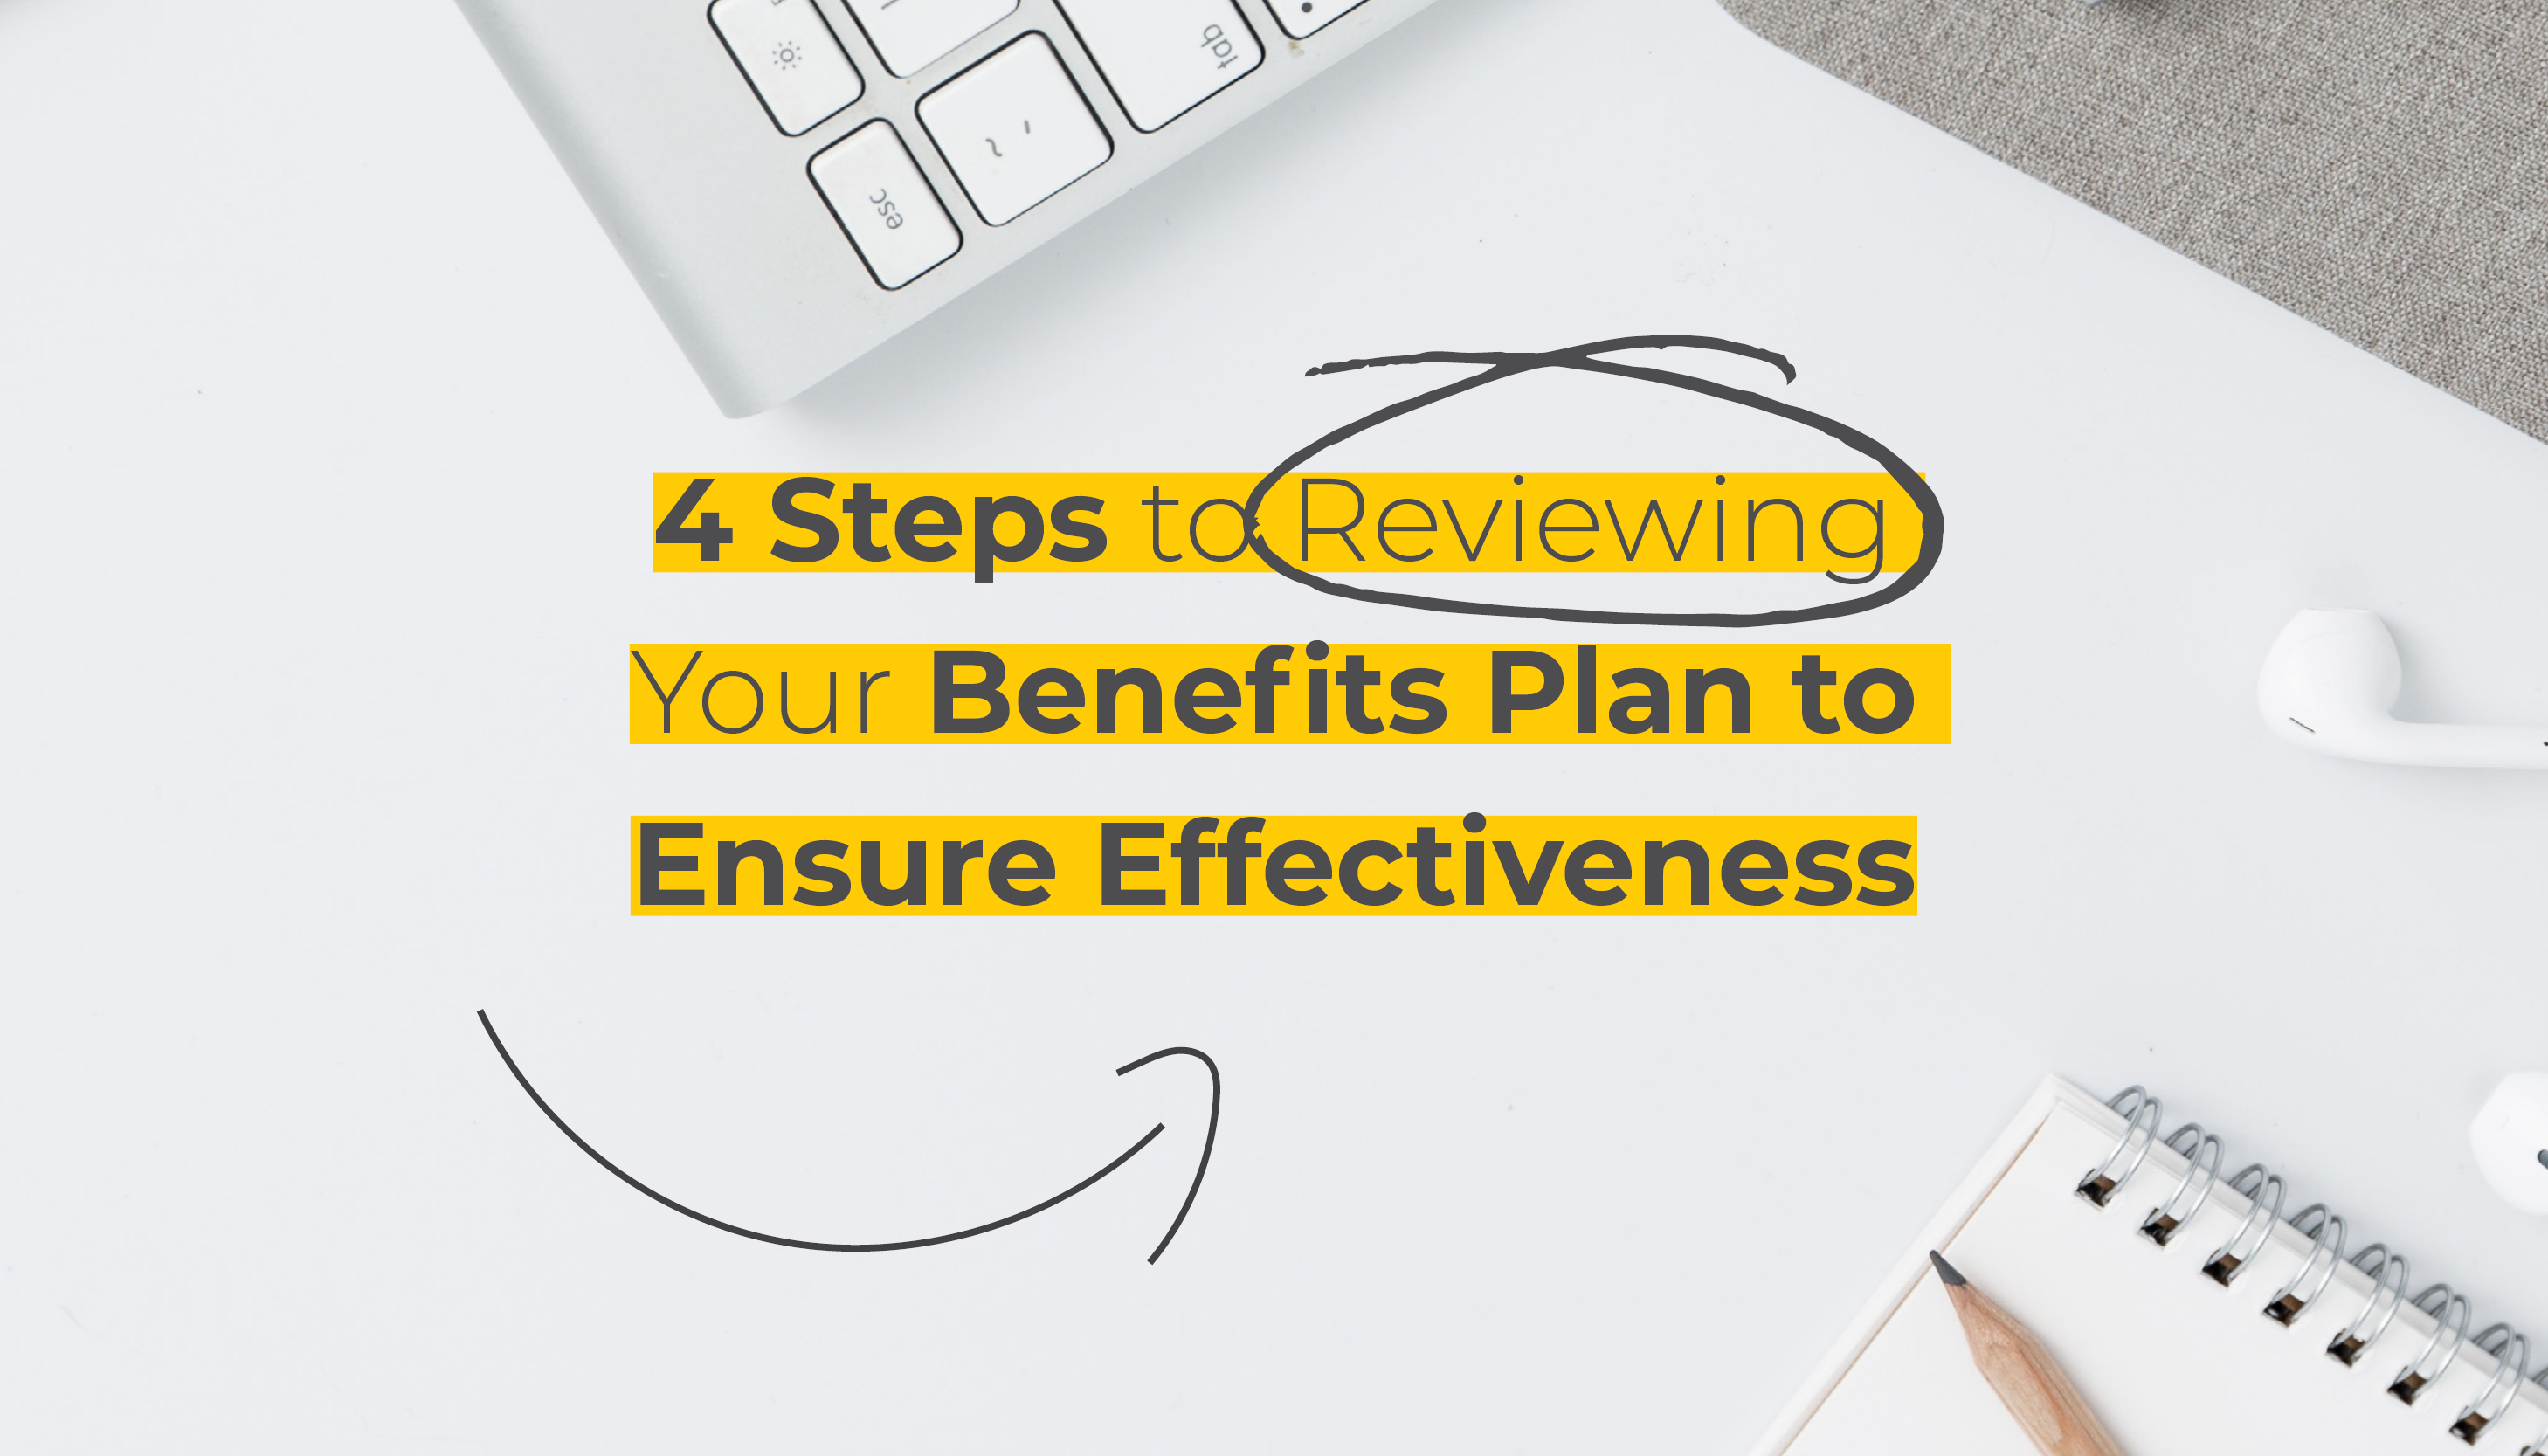 4 Steps to Reviewing Your Benefits Plan to Ensure Effectiveness' | Benefits by Design